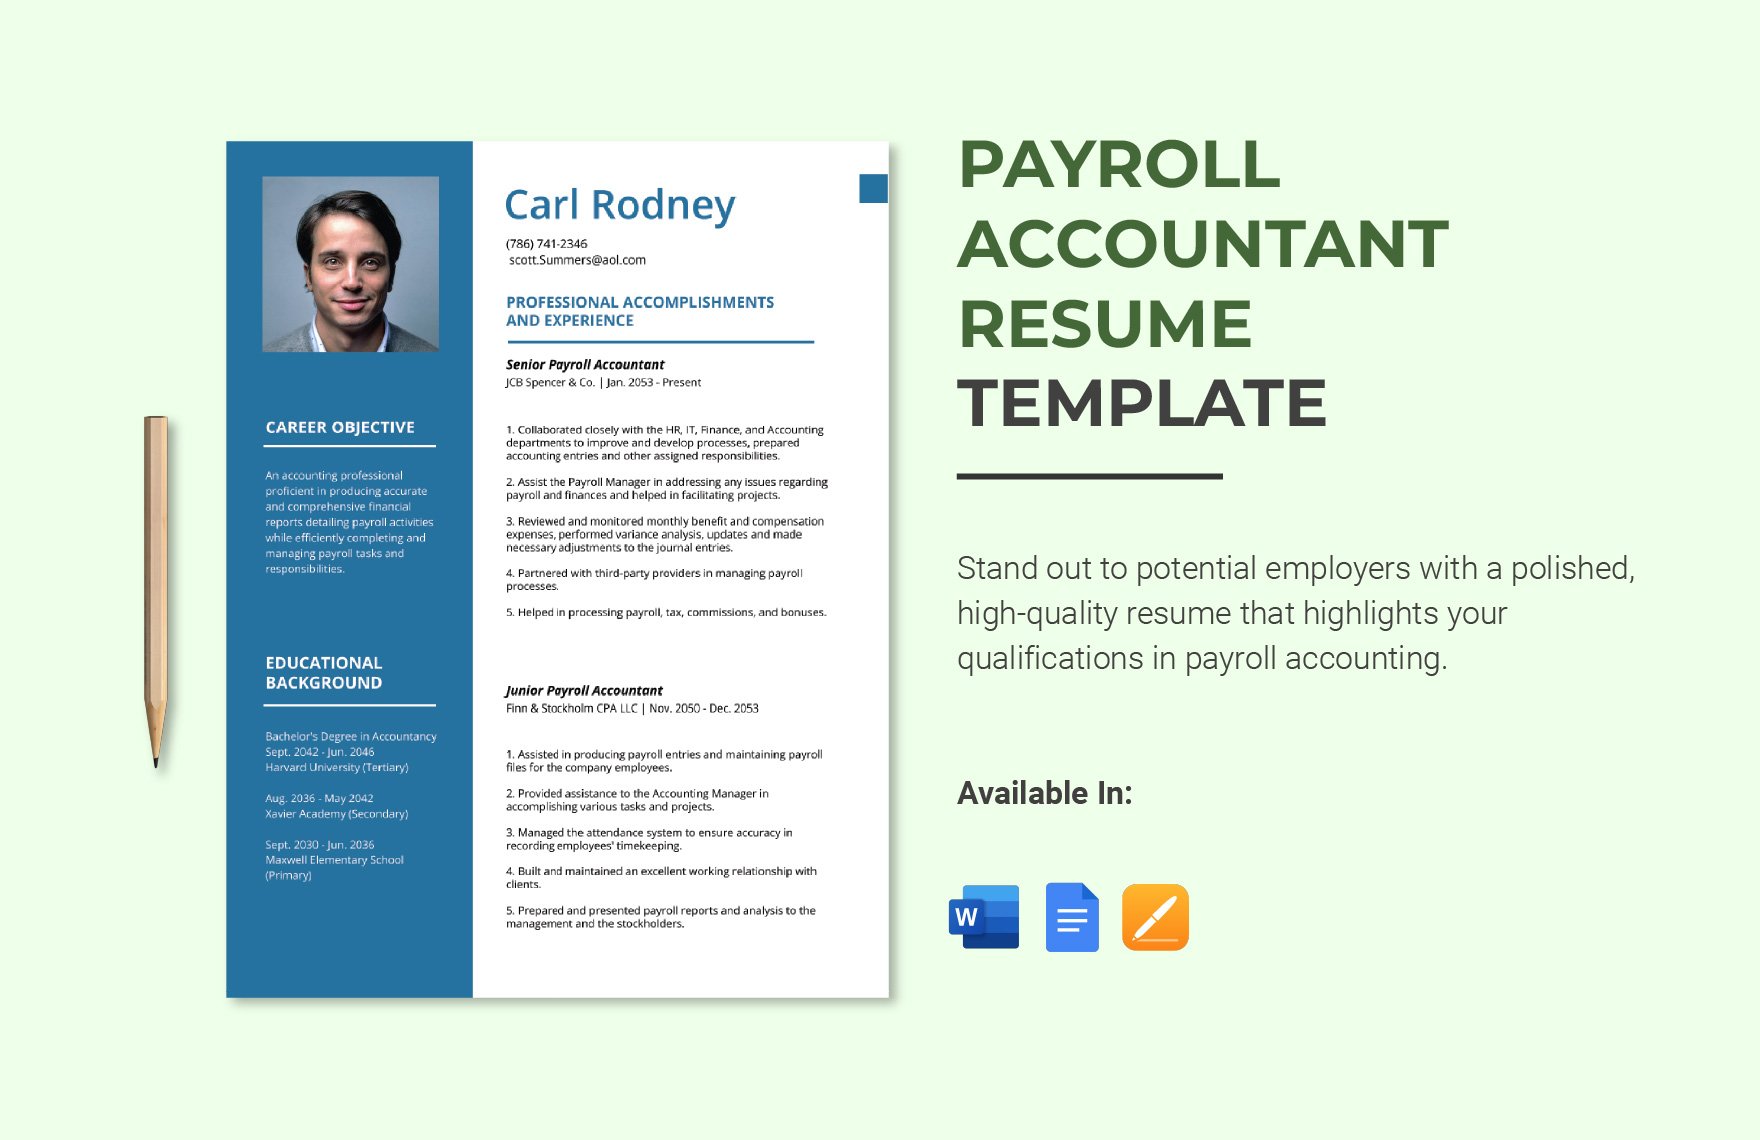 Payroll Accountant Resume in Word, Google Docs, Apple Pages